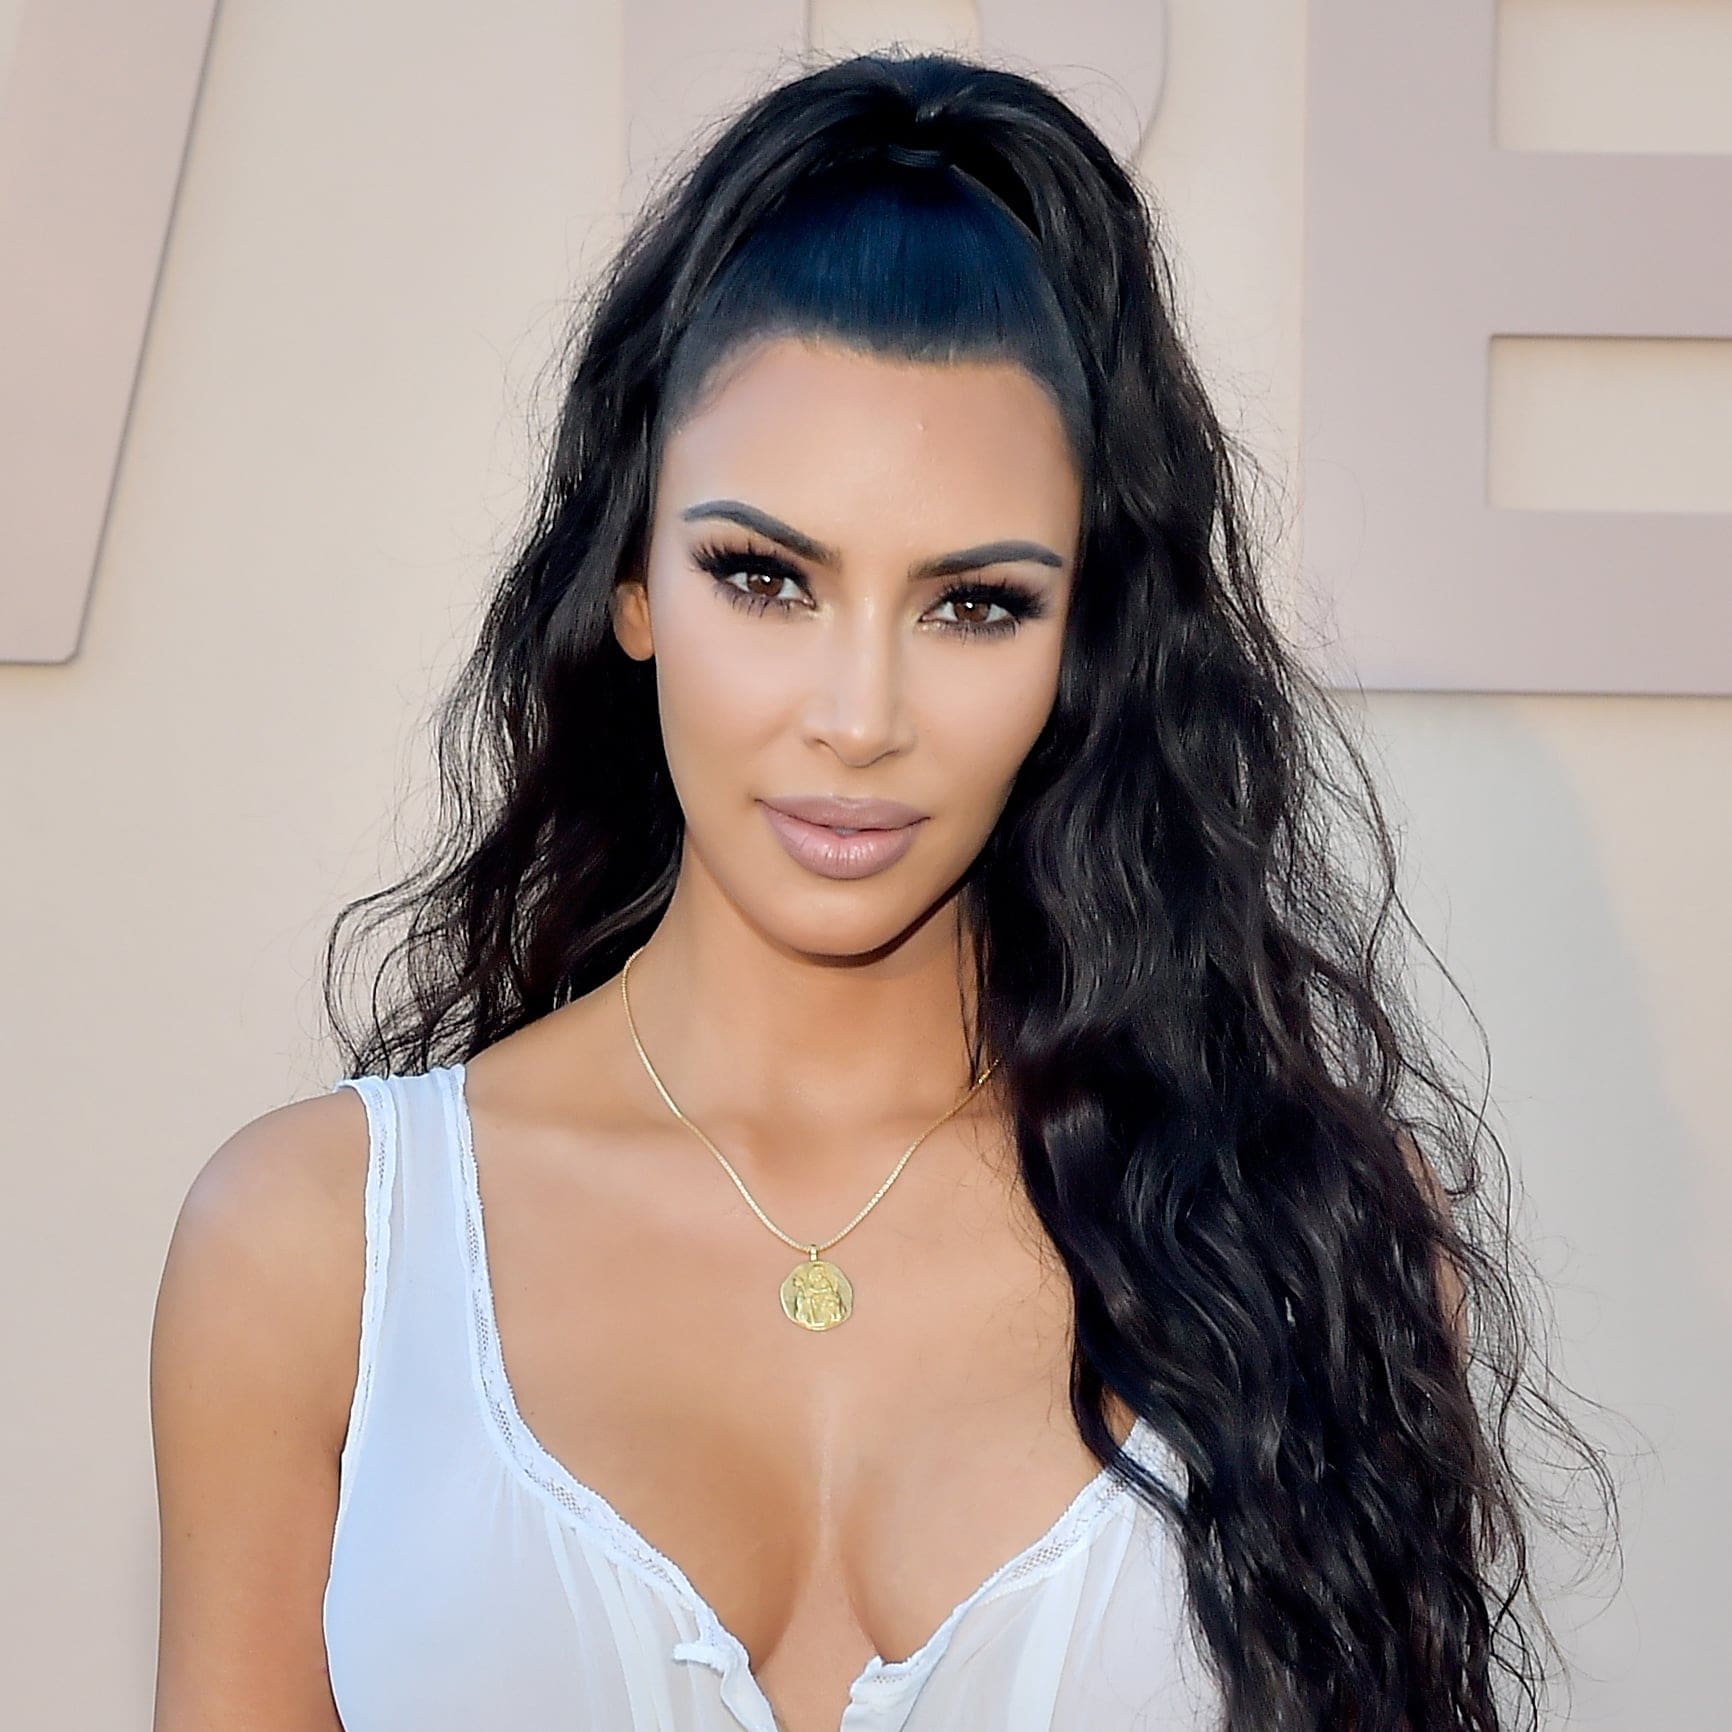 kim-kardashian-asks-the-governor-of-colorado-to-change-the-states-laws-heres-why